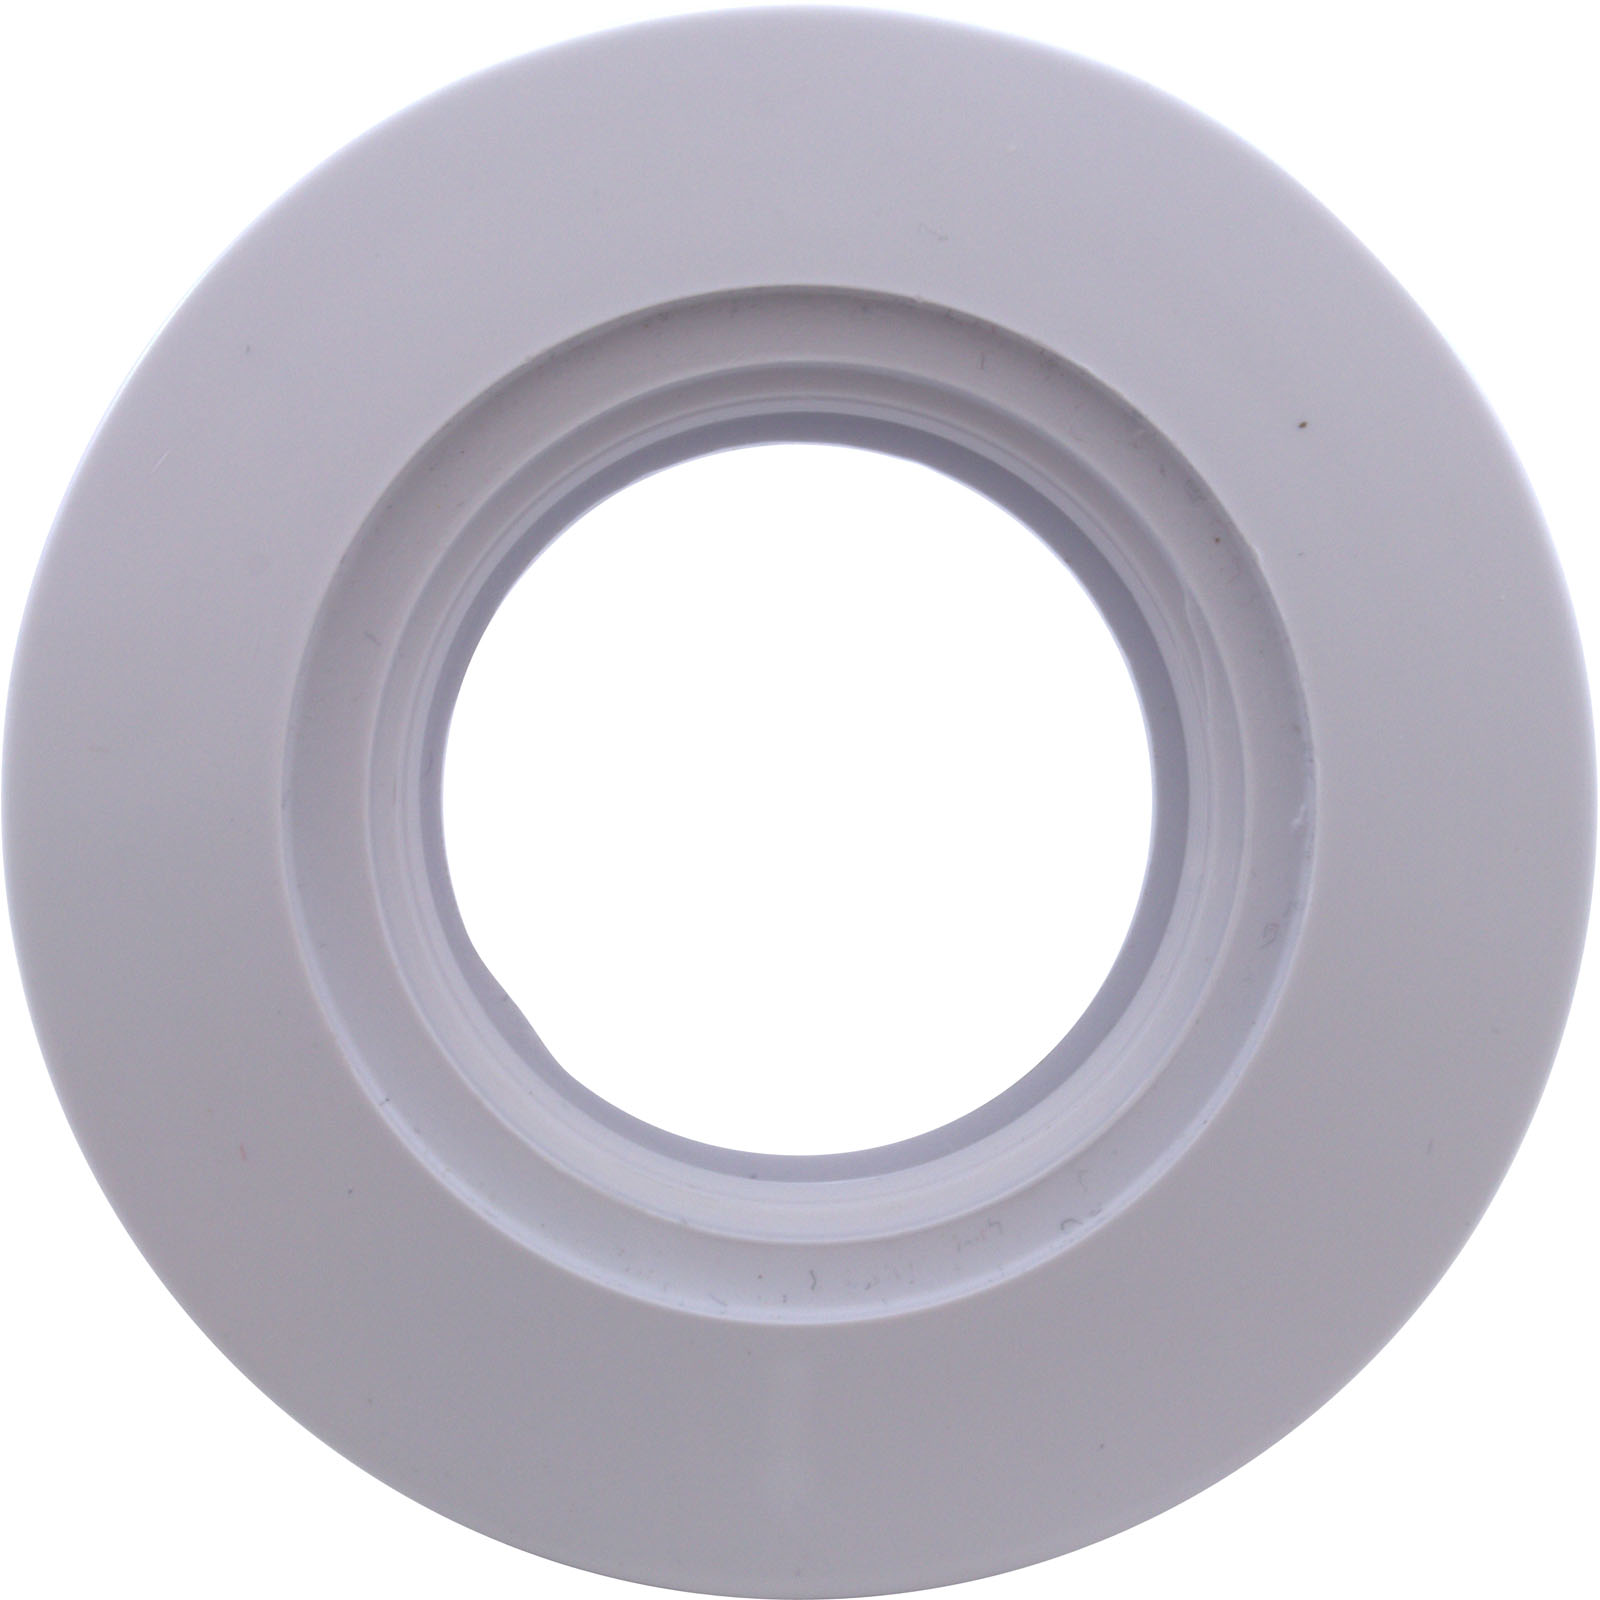 Picture of 25524-200-000 Wall Fitting CMP 1-1/2